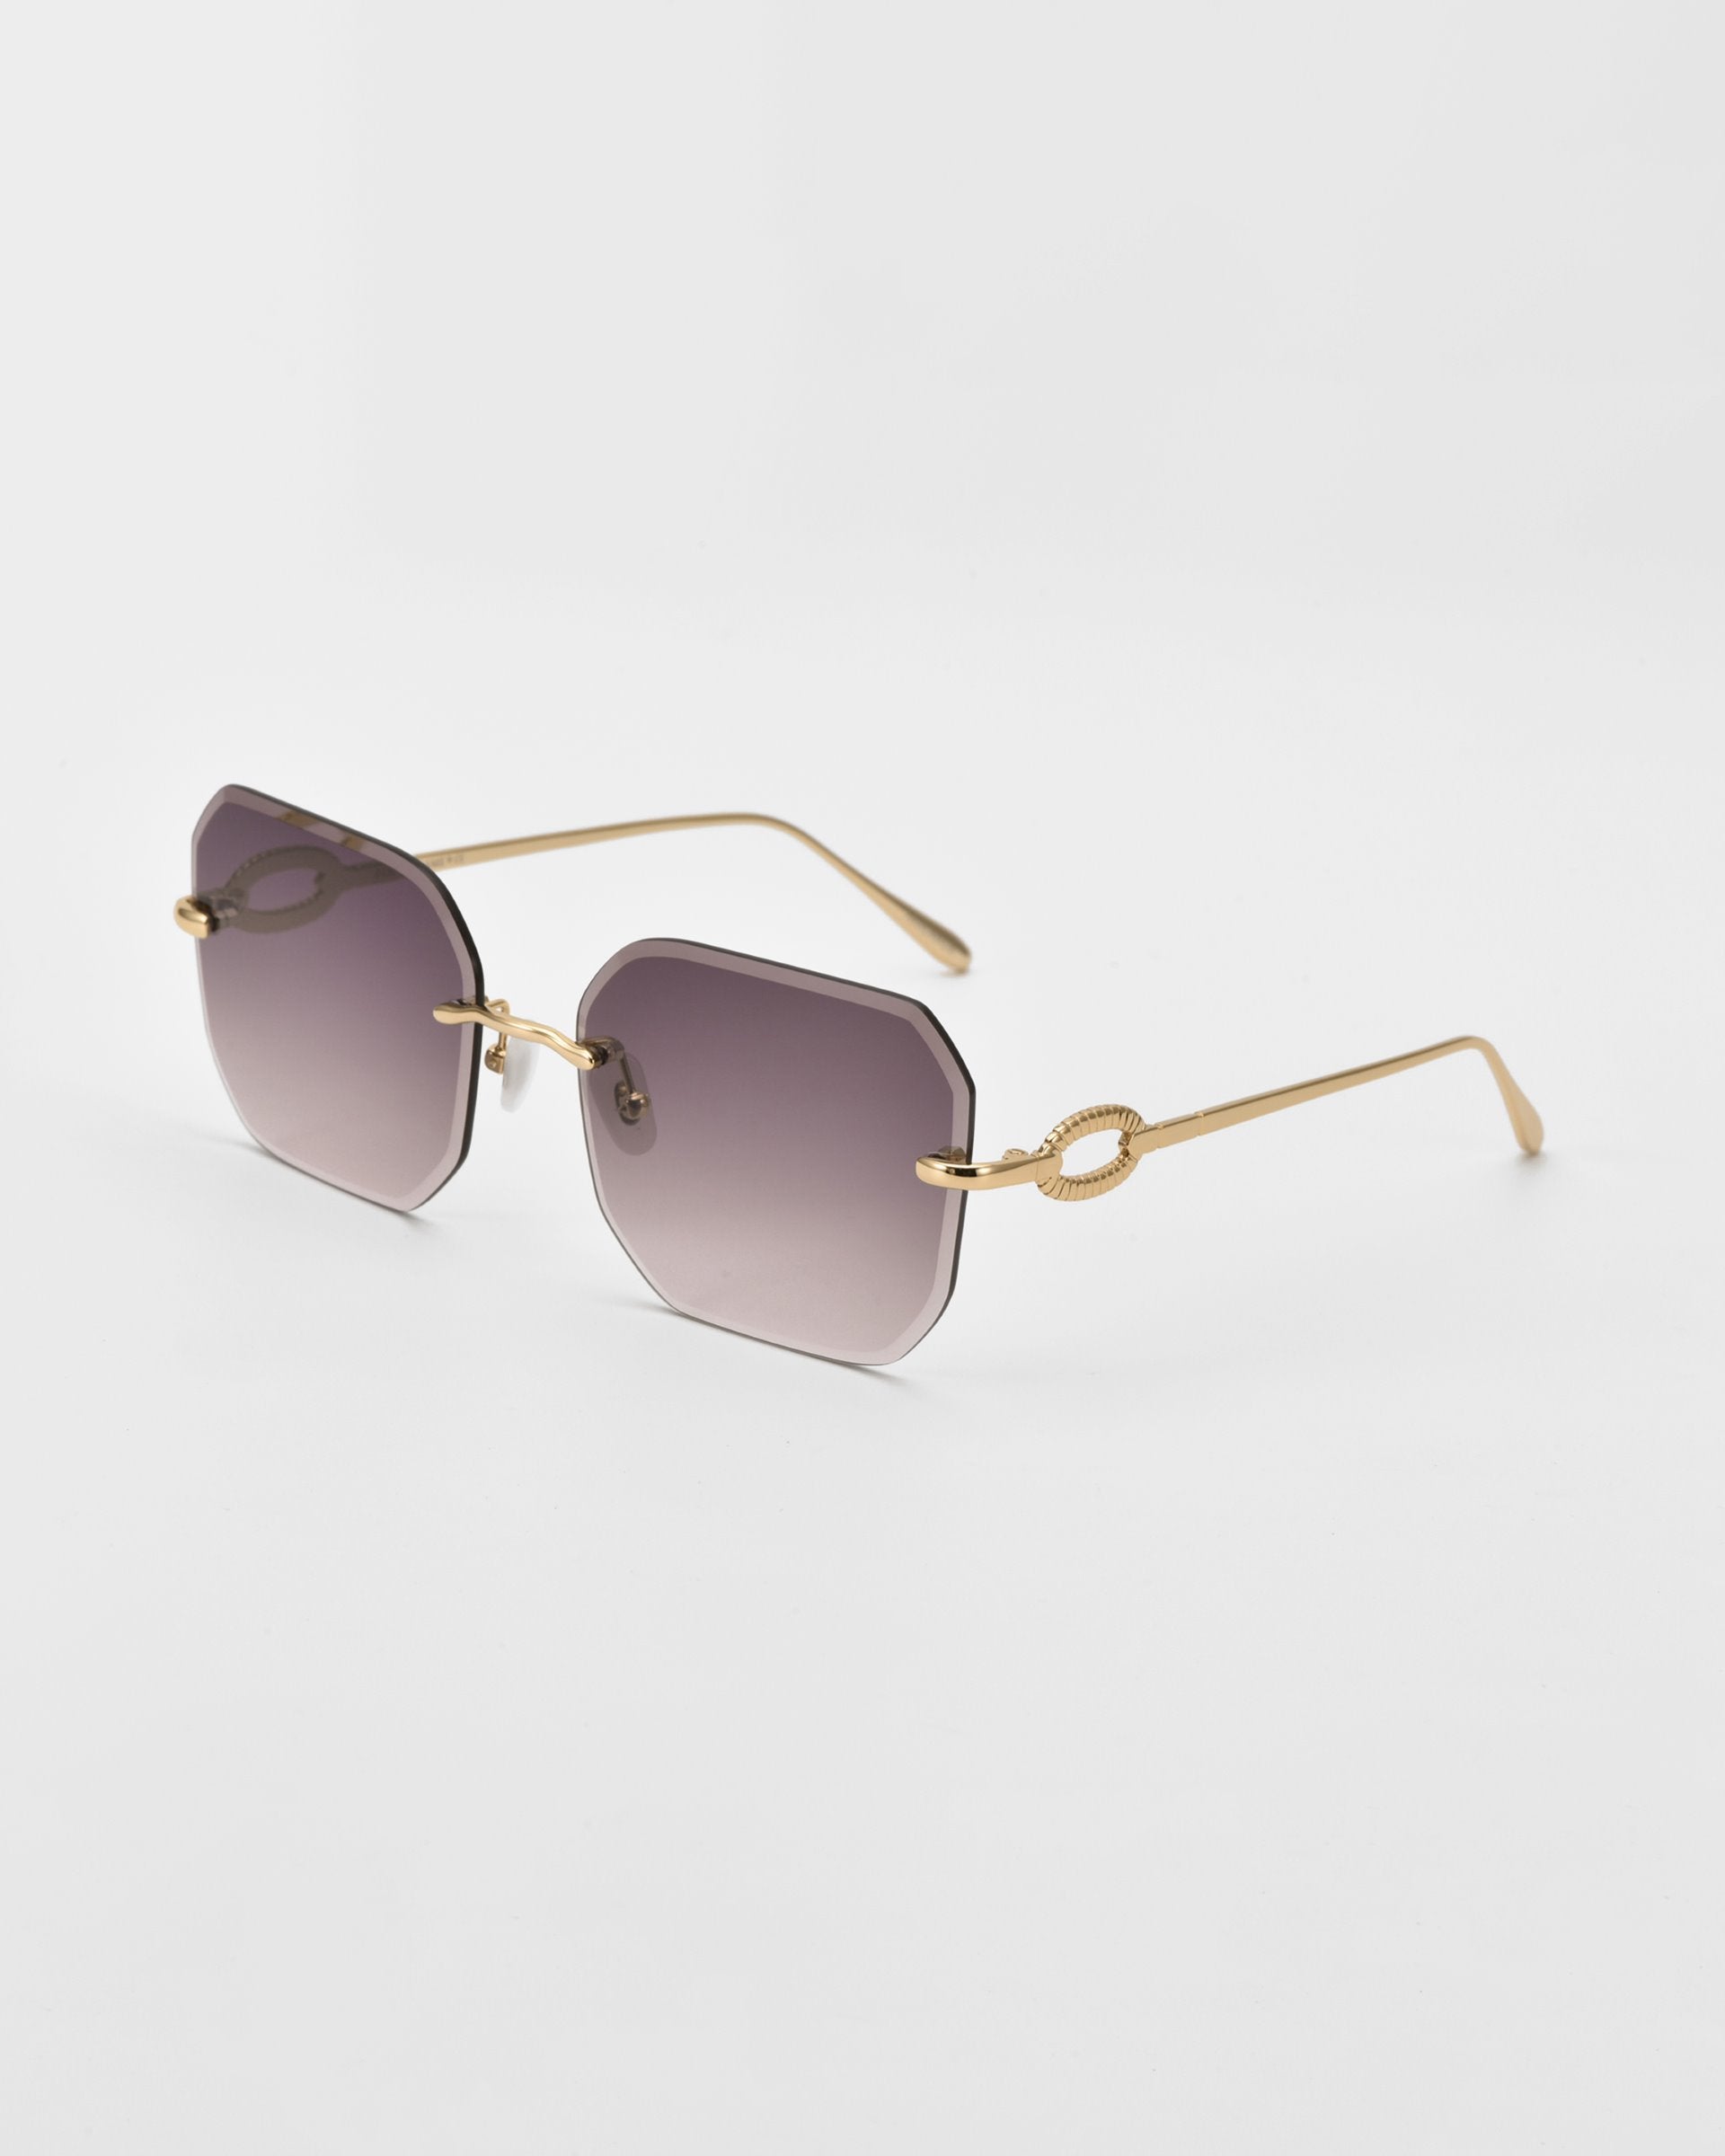 A pair of stylish For Art&#39;s Sake® Aria sunglasses with thin, gold metal frames and gradient dark, diamond-cut lenses. The temples have a distinctive gold knot detail near the lenses and extend into sleek, straight arms with jade-stone nose pads. The background is plain and white.